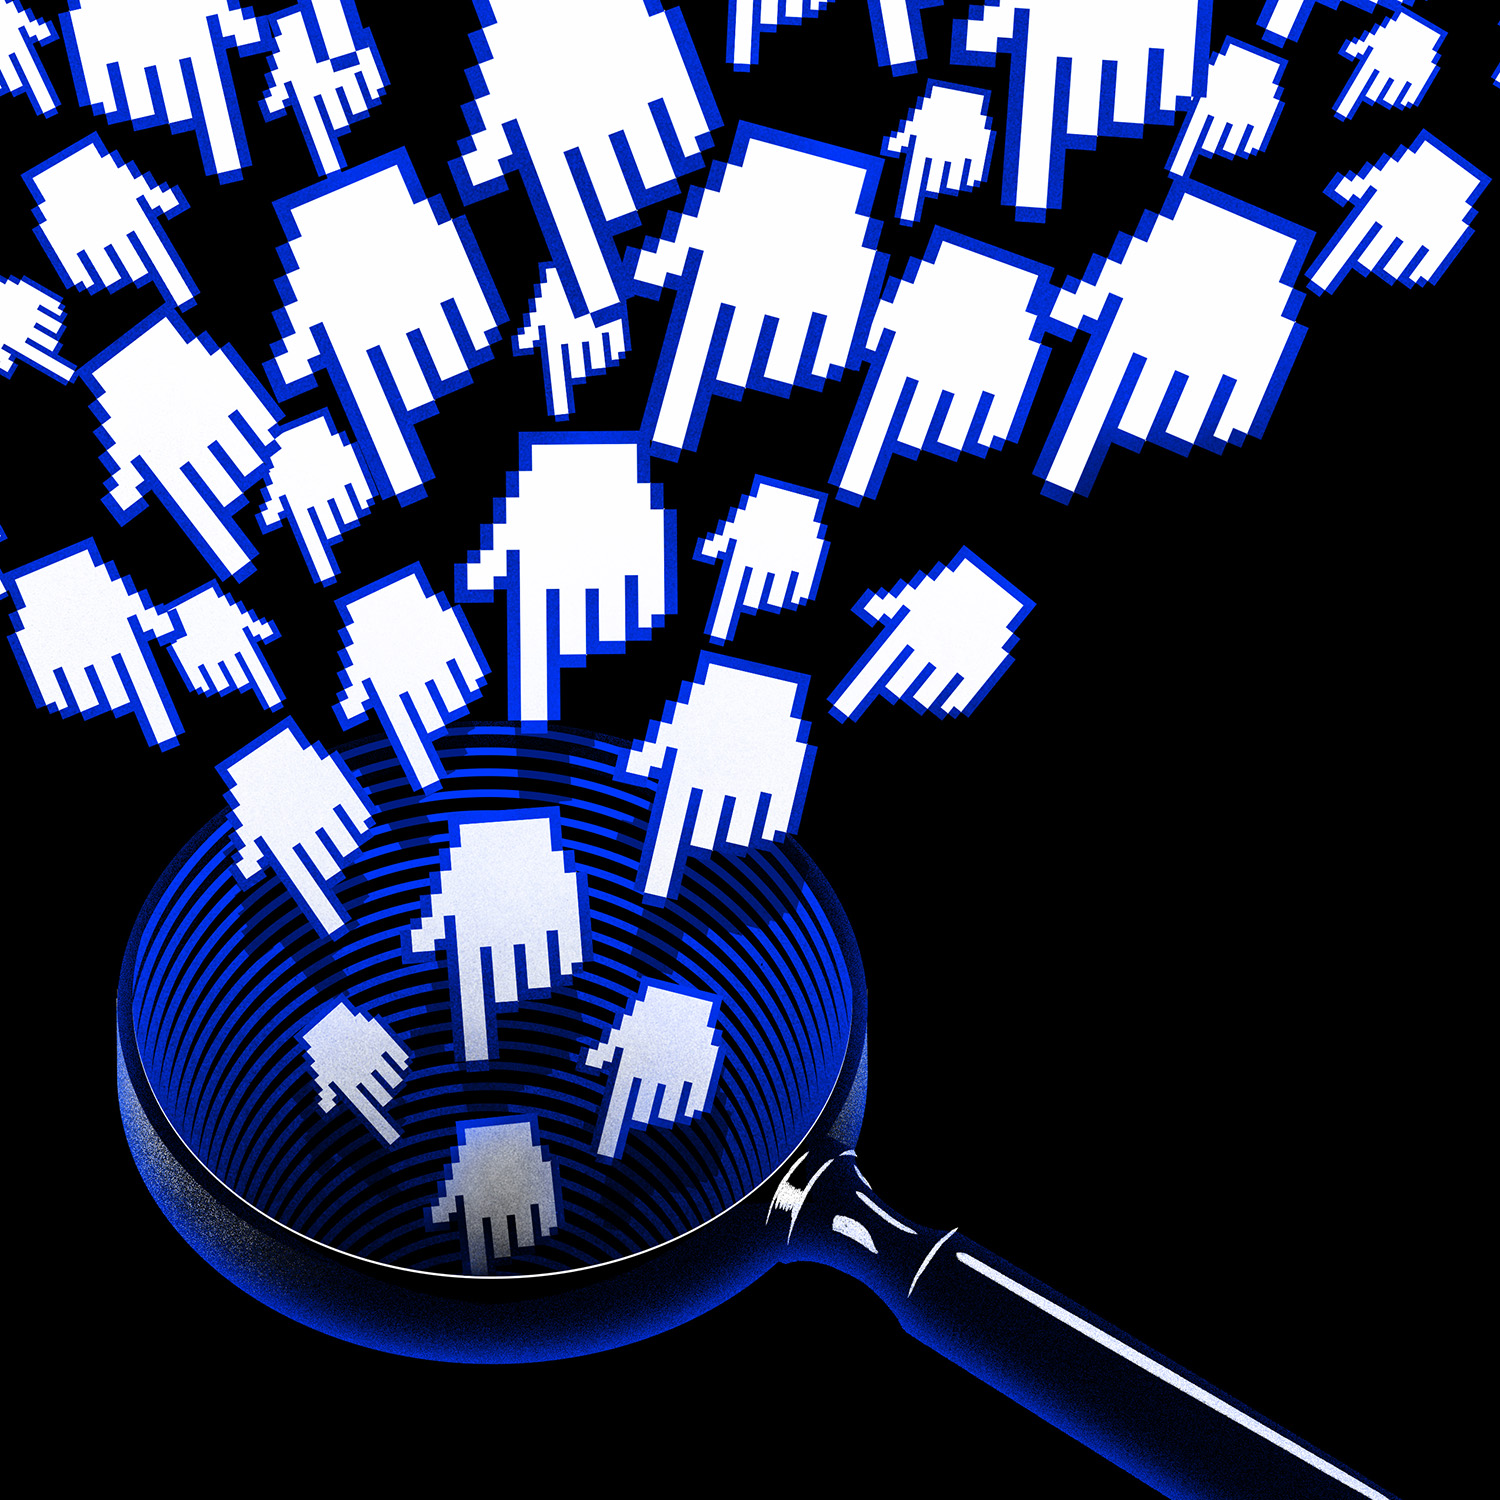 Image of a cluster of digital, white pointing hands descending towards a blue magnifying glass with a black background.